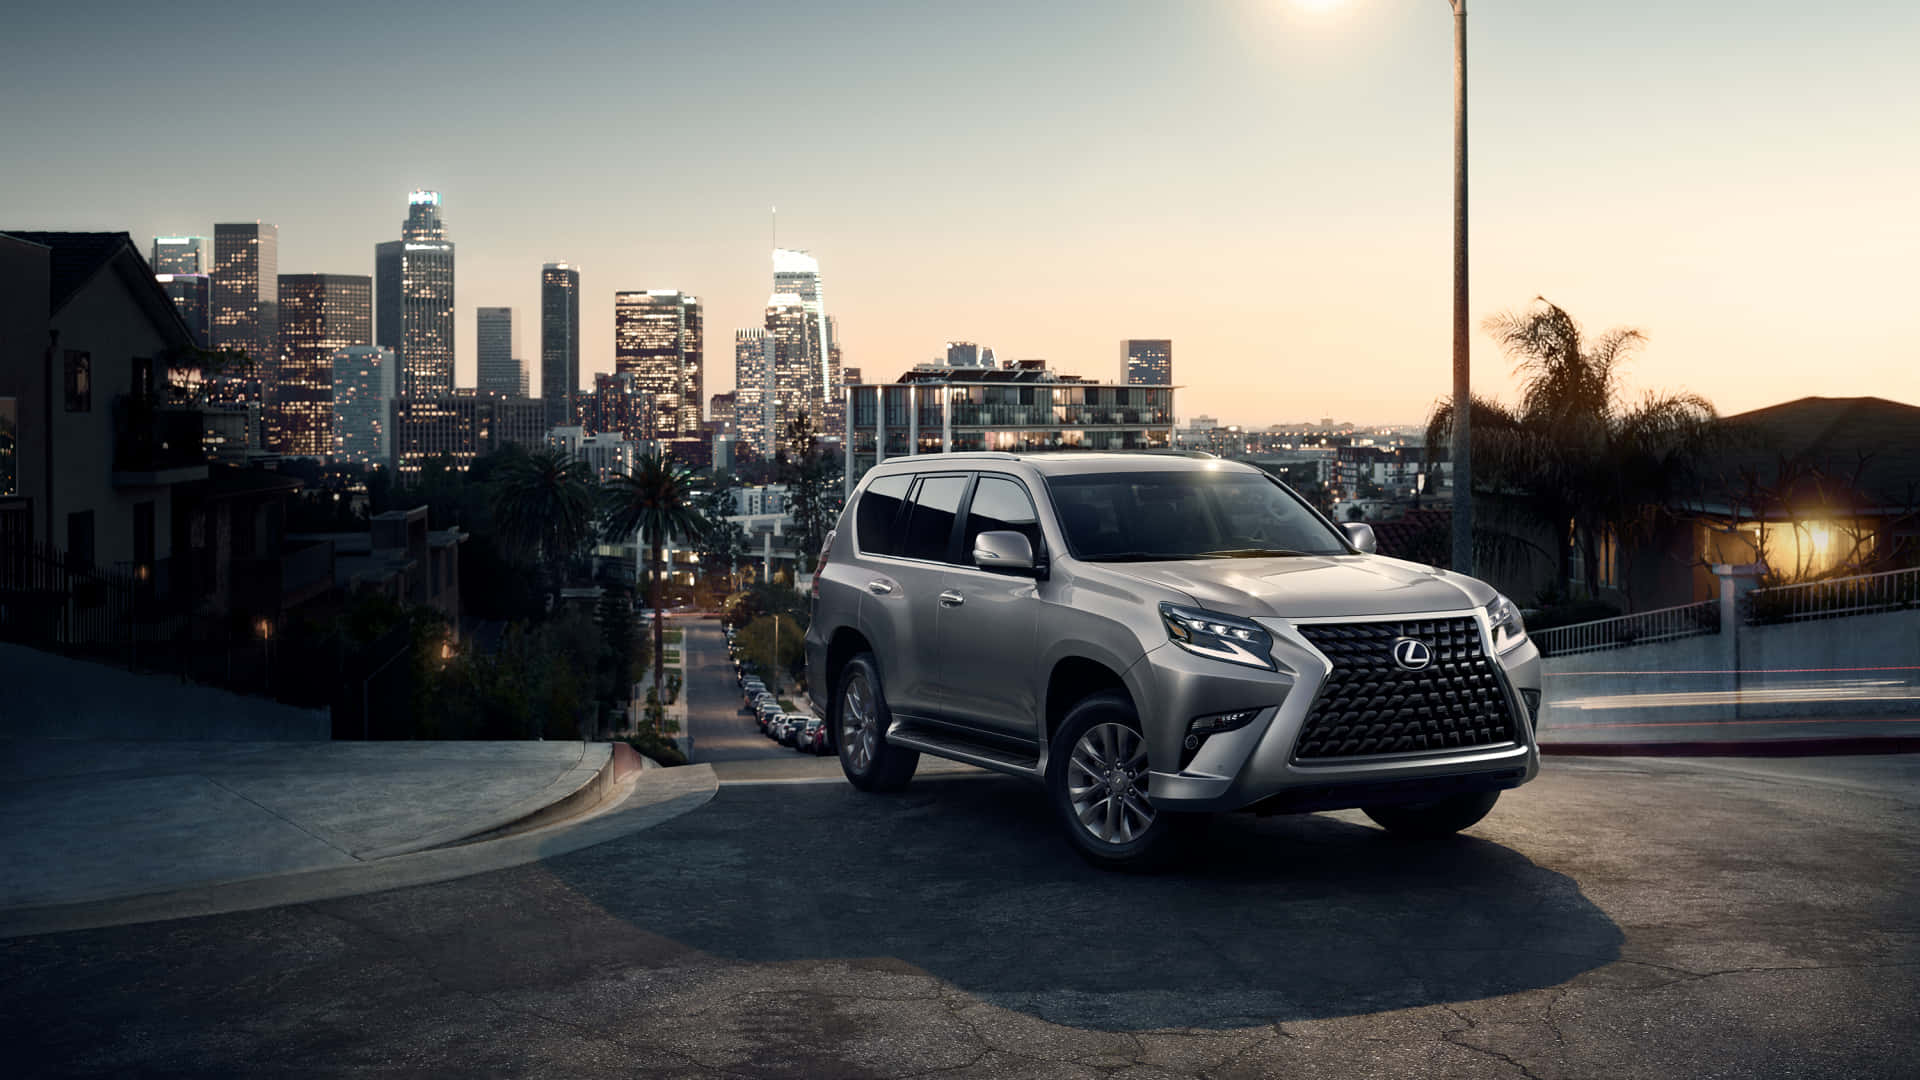 "2022 Lexus GX 460: The Epitome of Luxury and Performance" Wallpaper